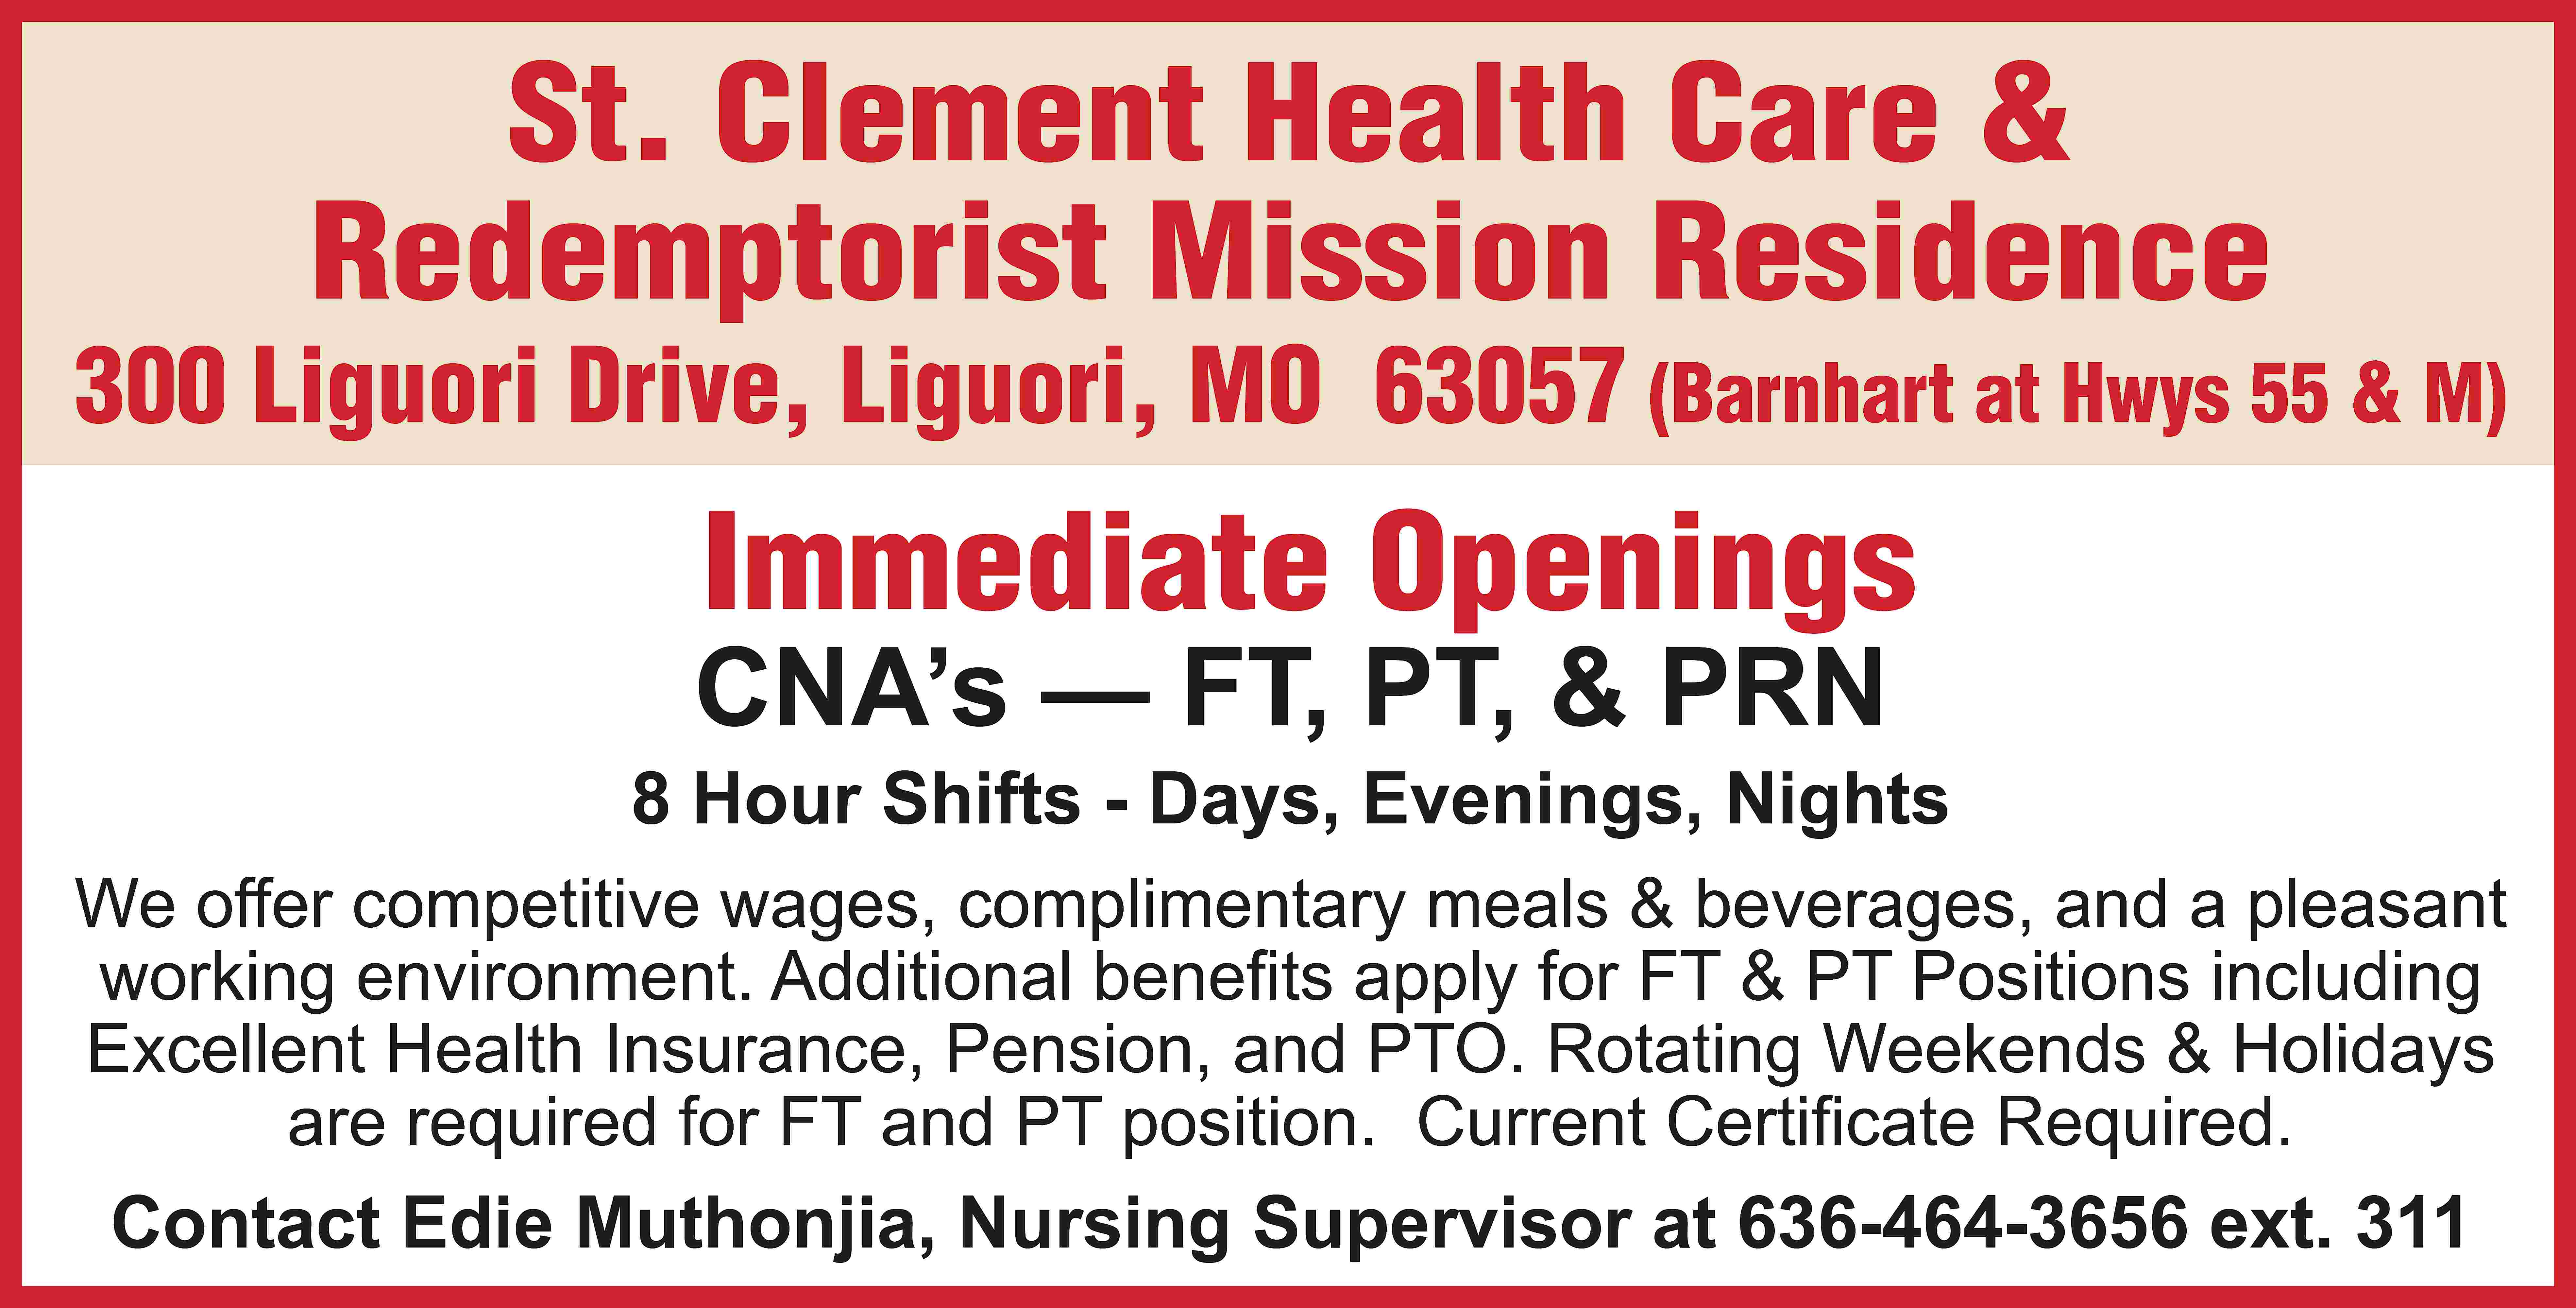 St. Clement Health Care &  St. Clement Health Care & Redemptorist Mission Residence 300 Liguori Drive, Liguori, MO 63057 (Barnhart at Hwys 55 & M) Immediate Openings CNA’s — FT, PT, & PRN 8 Hour Shifts - Days, Evenings, Nights We offer competitive wages, complimentary meals & beverages, and a pleasant working environment. Additional benefits apply for FT & PT Positions including Excellent Health Insurance, Pension, and PTO. Rotating Weekends & Holidays are required for FT and PT position. Current Certificate Required. Contact Edie Muthonjia, Nursing Supervisor at 636-464-3656 ext. 311